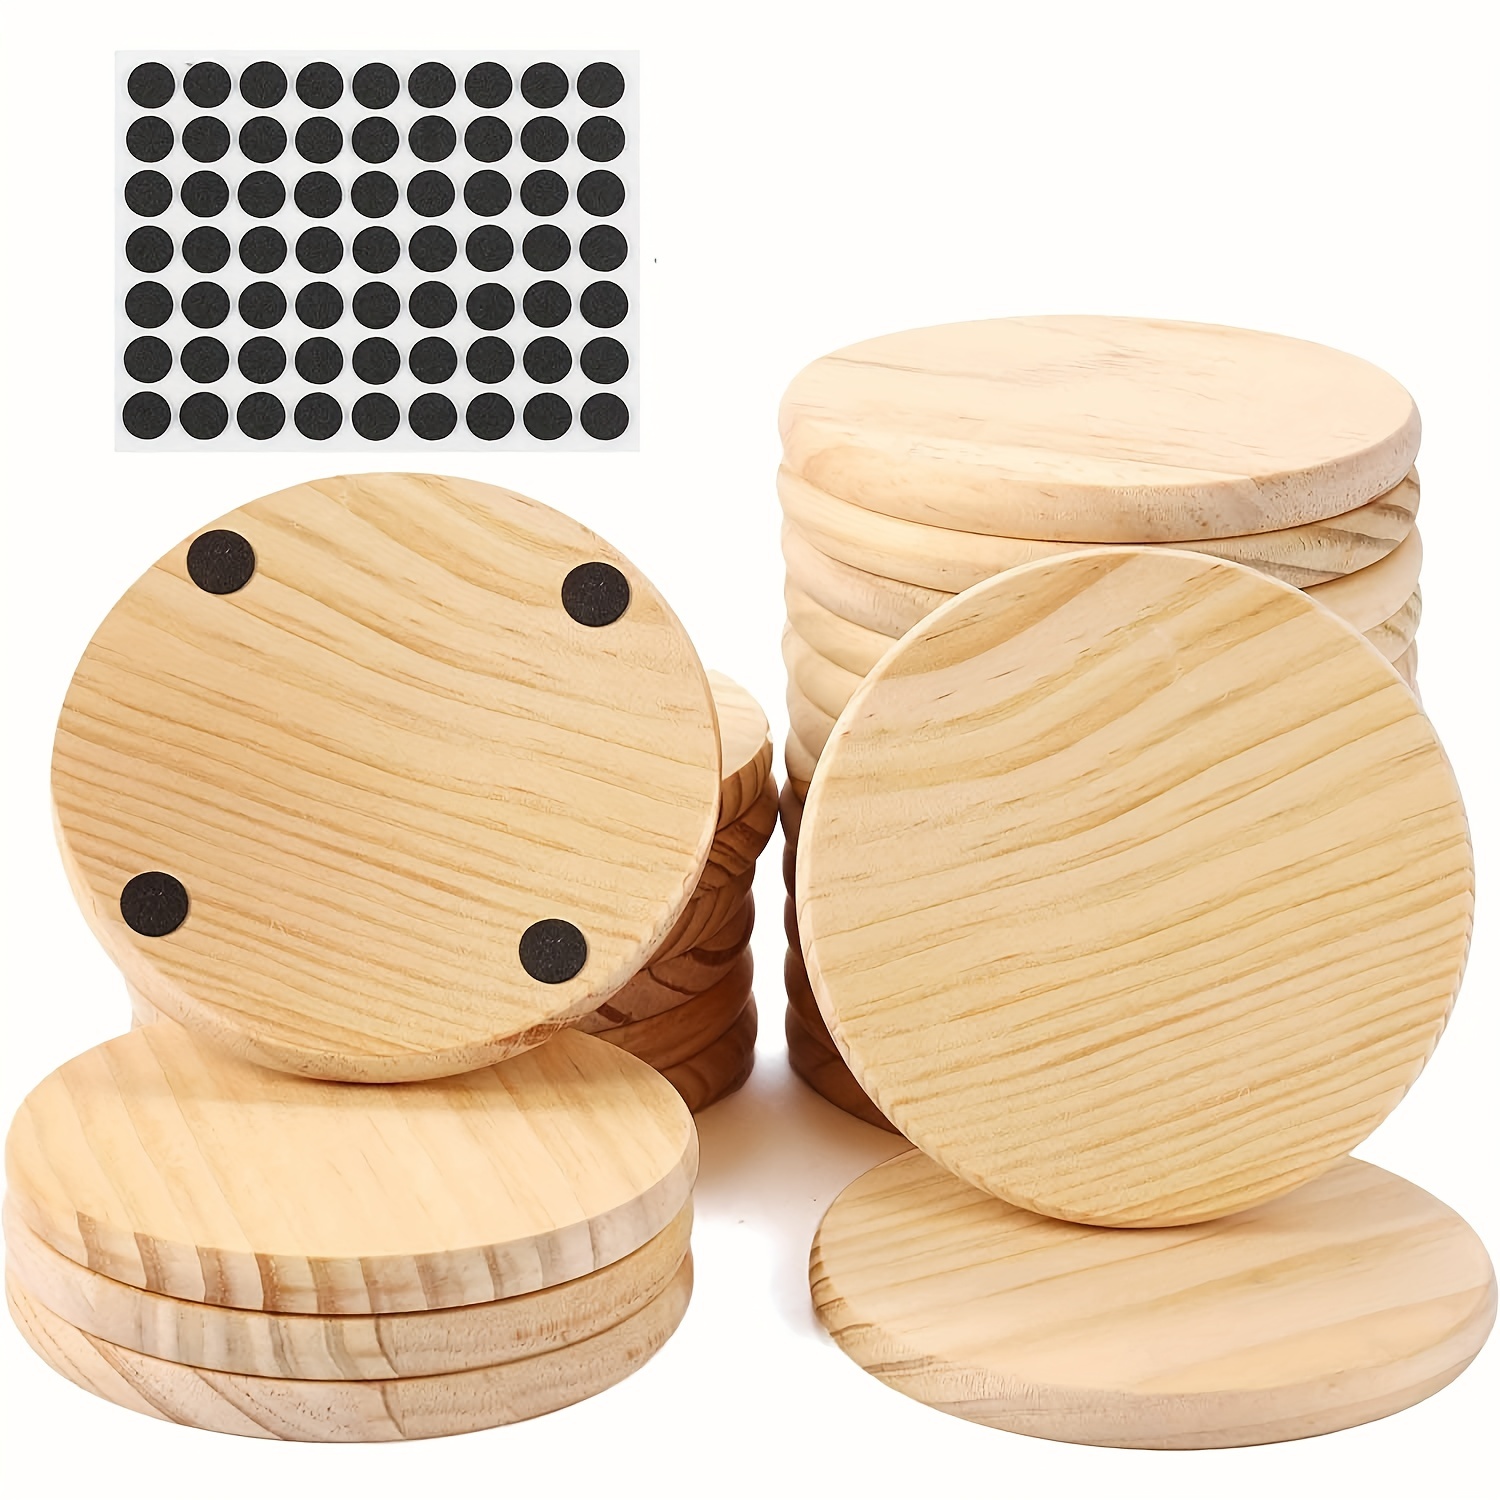 6pcs Wood Coasters, 4 Wood Slices For Nature Crafts And Wedding  Decoration, Blank Coasters Wood Kit For DIY Architectural Models Drawing  Painting Wo